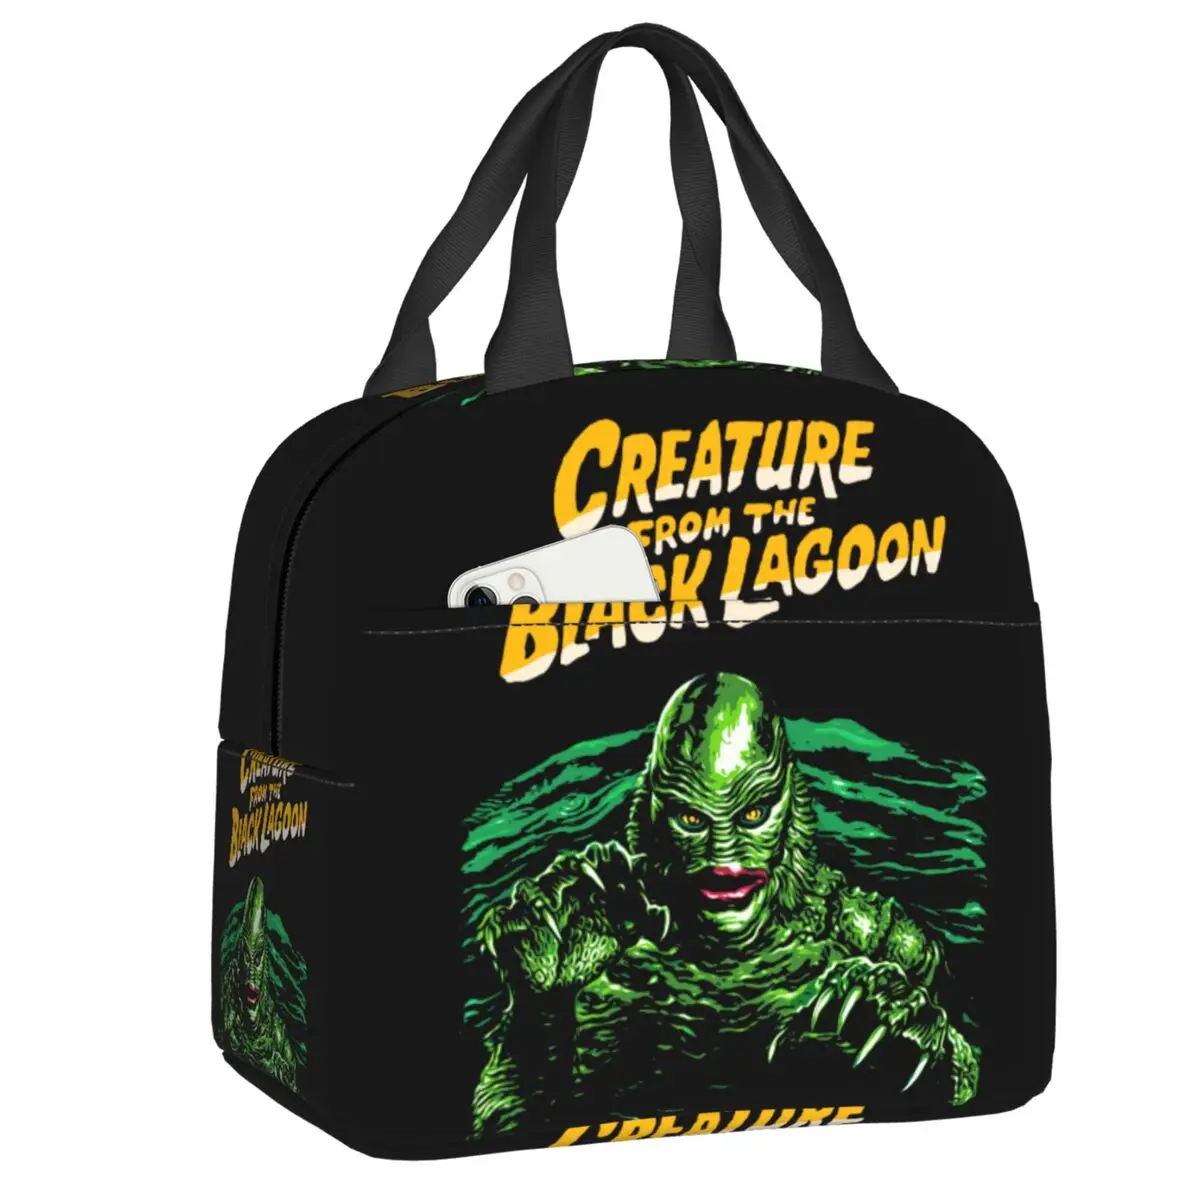 

Creature From The Black Lagoon Insulated Lunch Bag for Women Halloween Horror Movie Resuable Cooler Thermal Food Lunch Box Tote